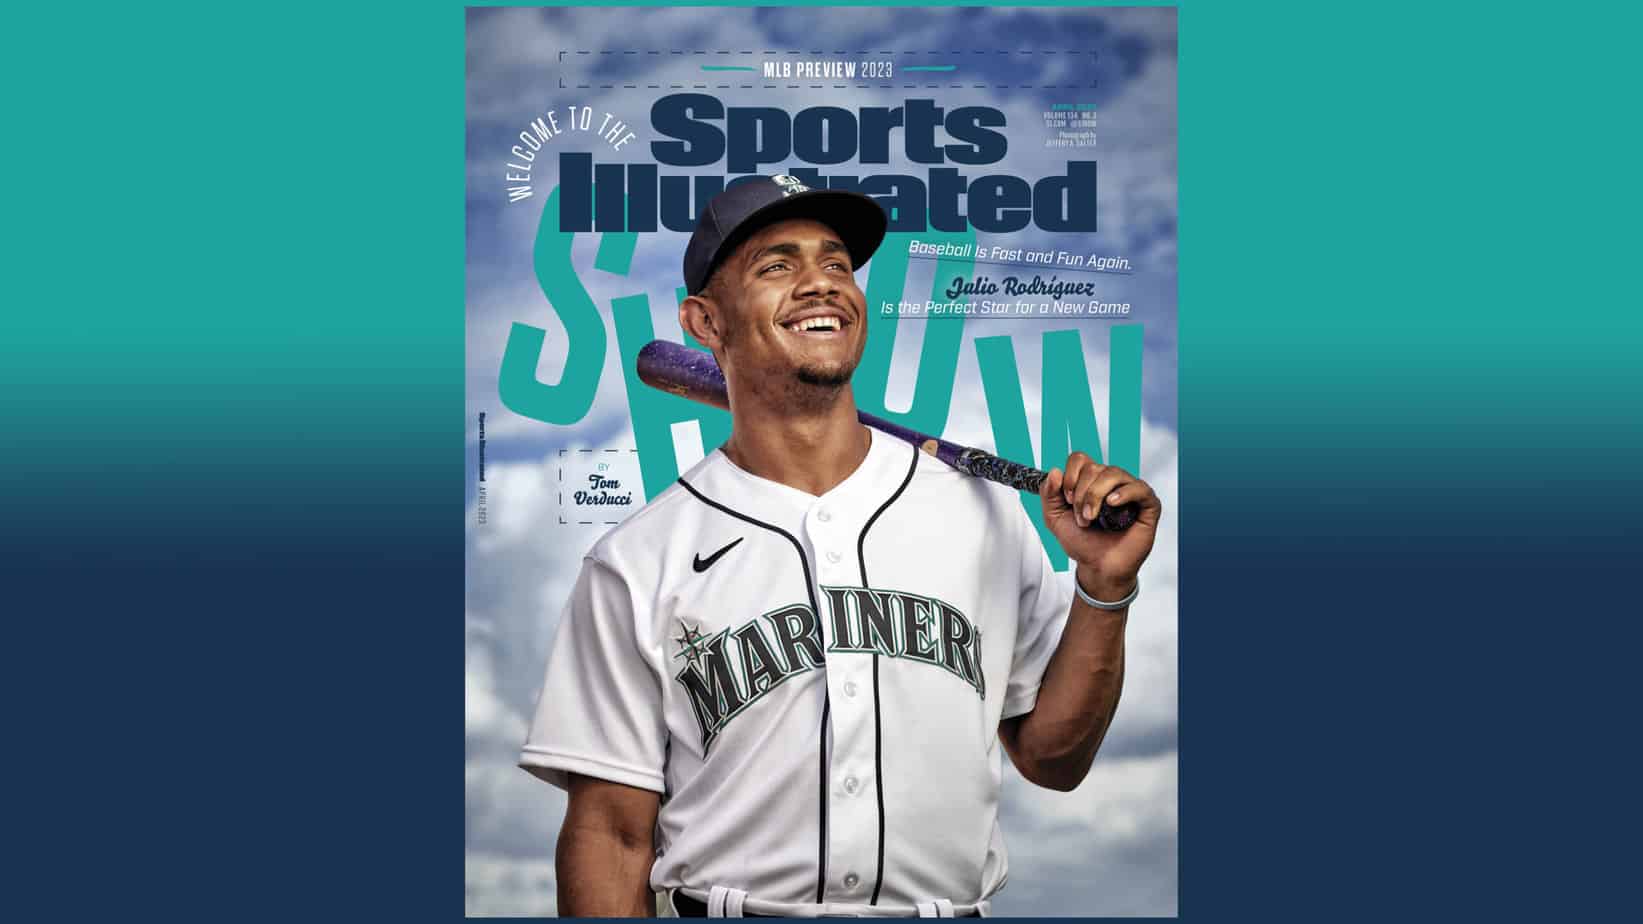 Andrew Benintendi, Jackie Bradley Jr., Mookie Betts (Red Sox's Killer B's)  on one of Sports Illustrated's MLB preview covers 